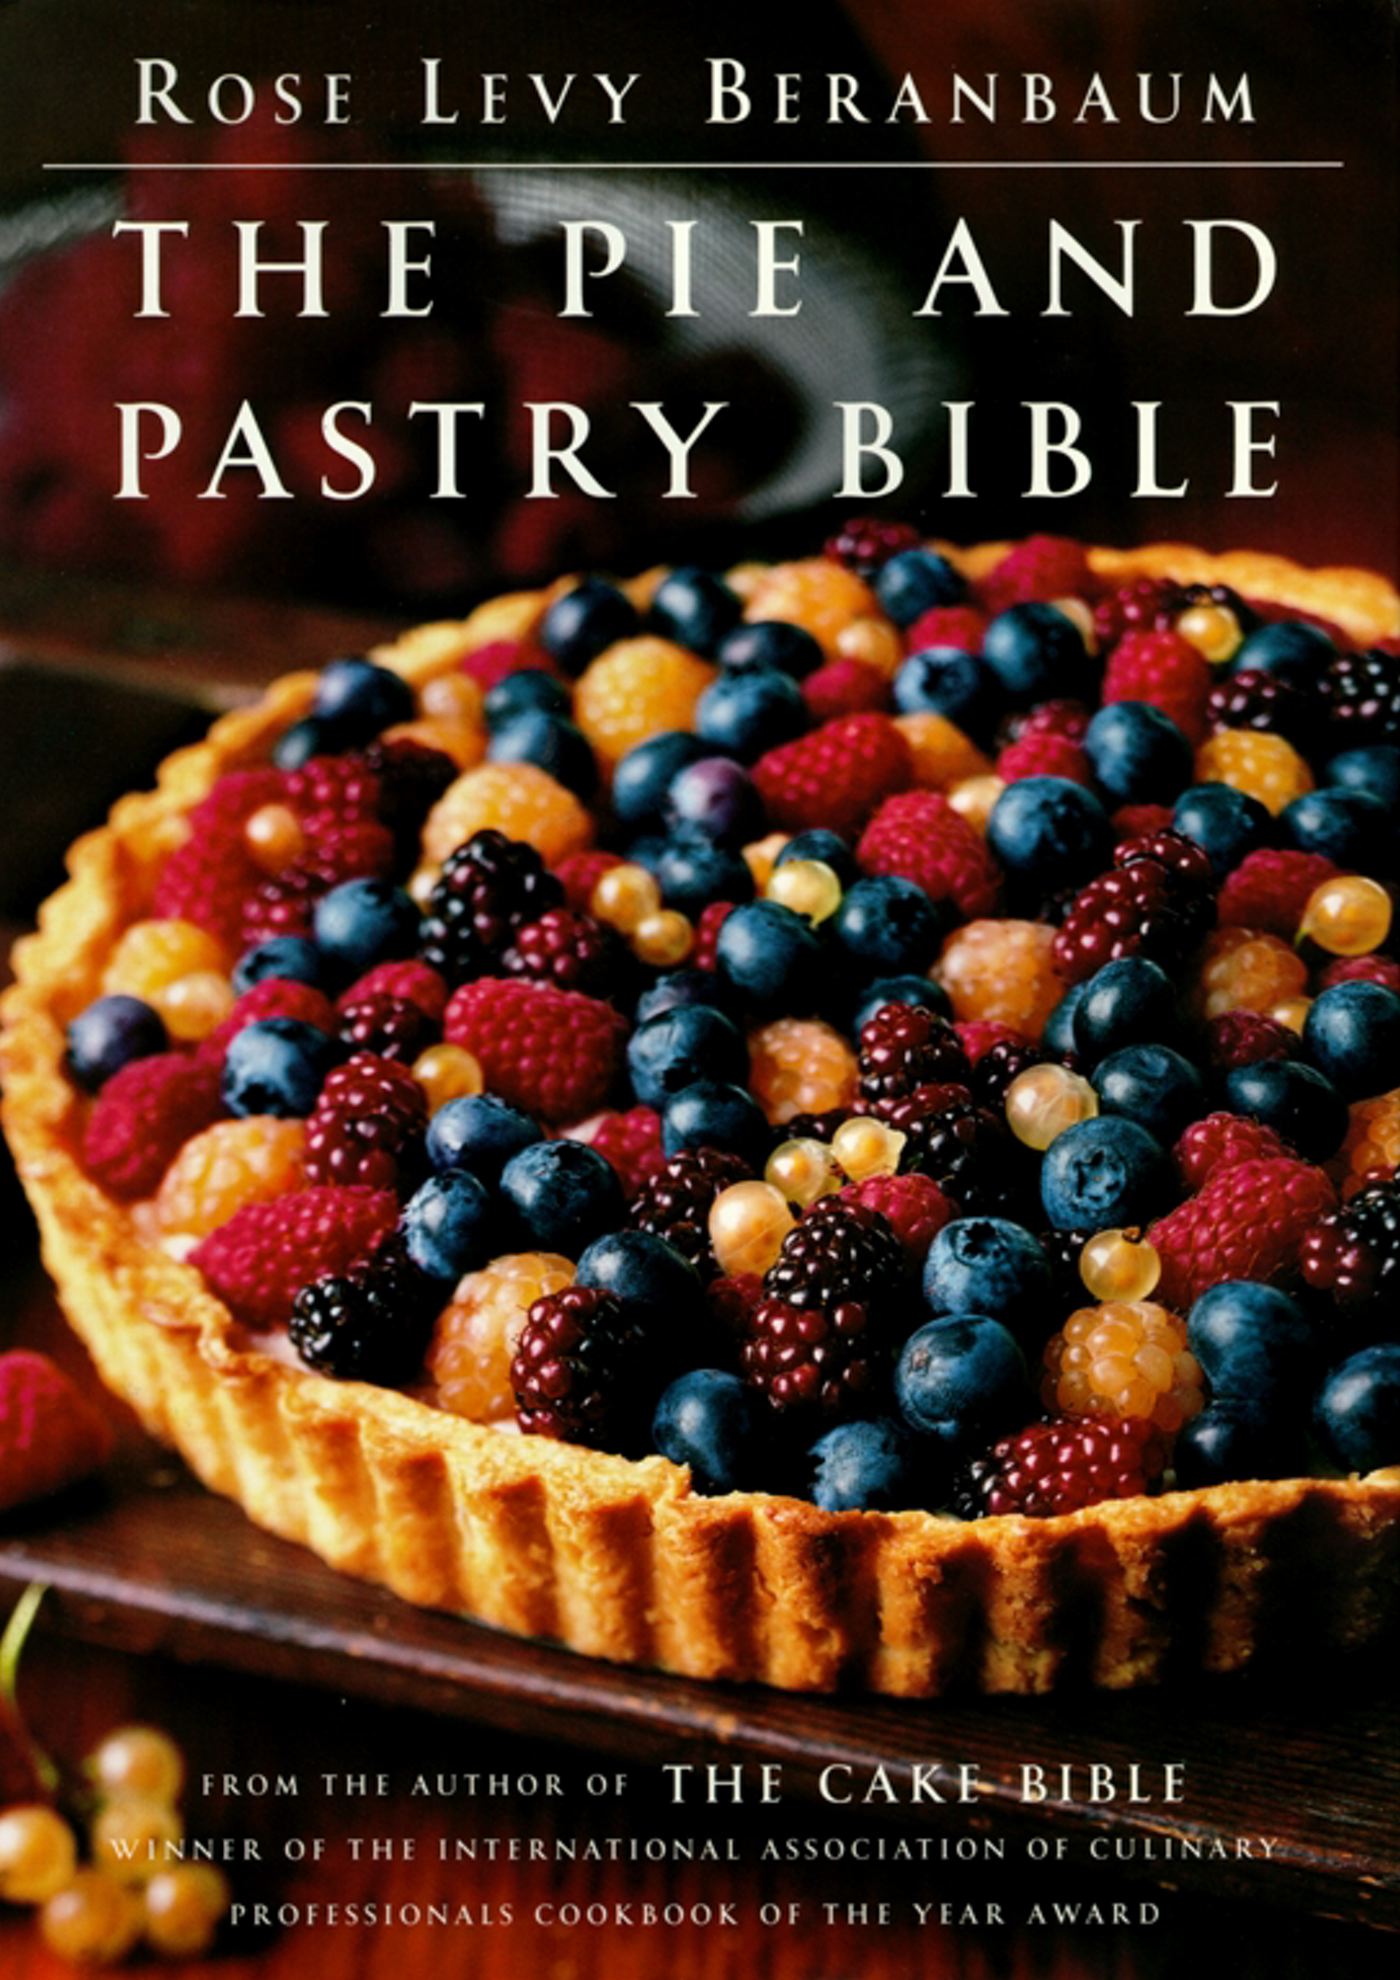 The Pie and Pastry Bible (Hardcover) - image 1 of 1